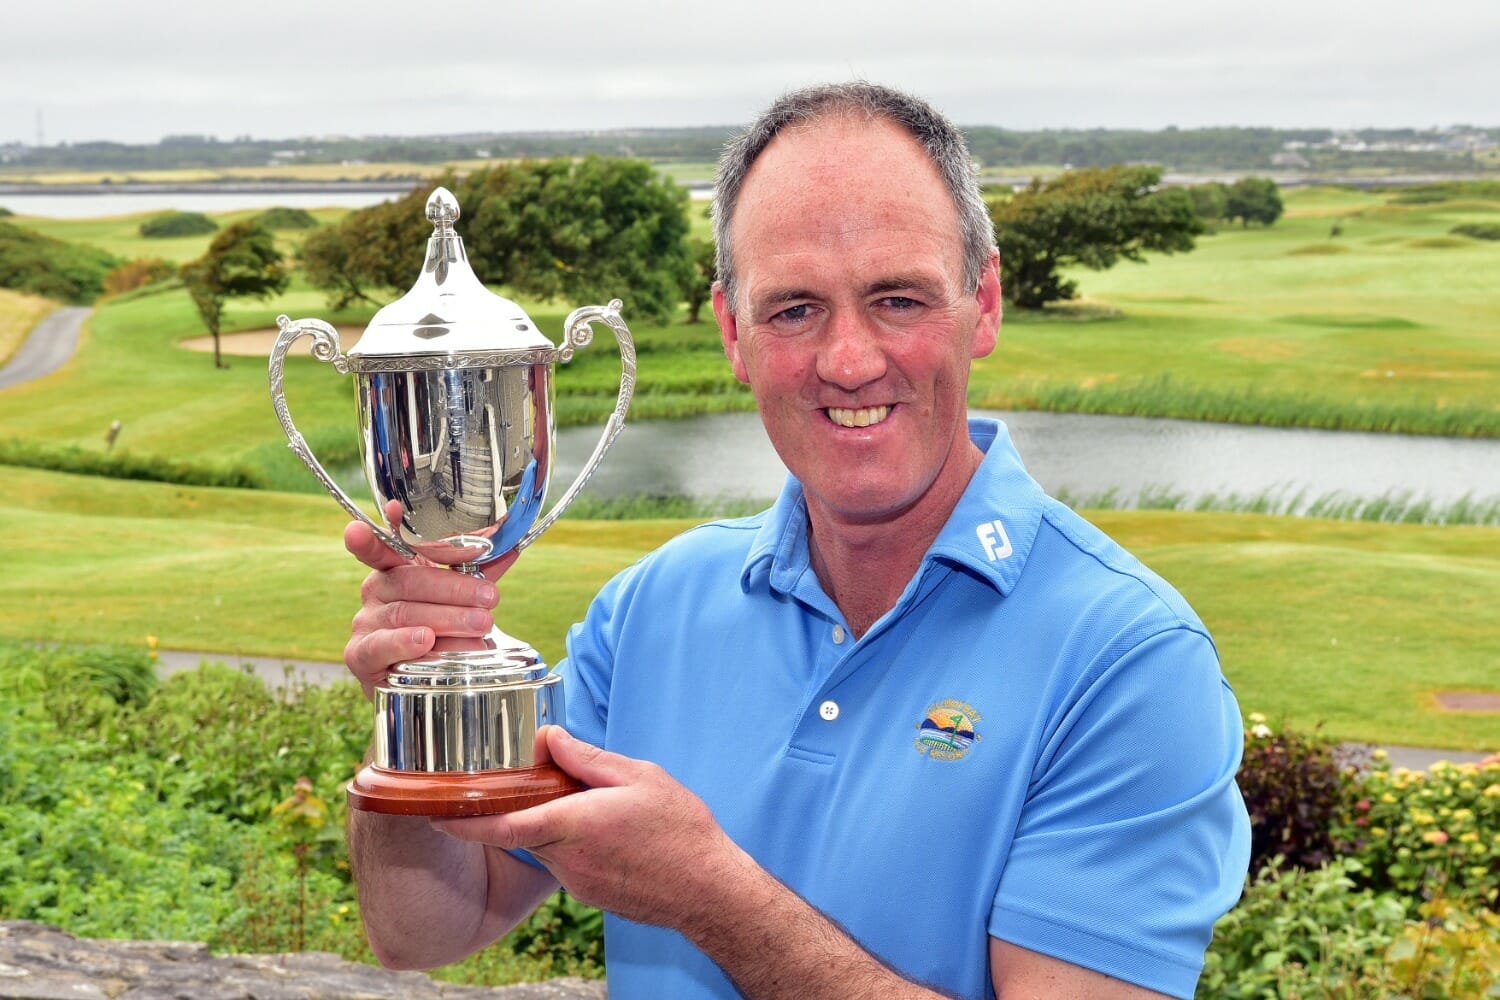 Back to Back for McCormack as he wins Irish Mid-Am